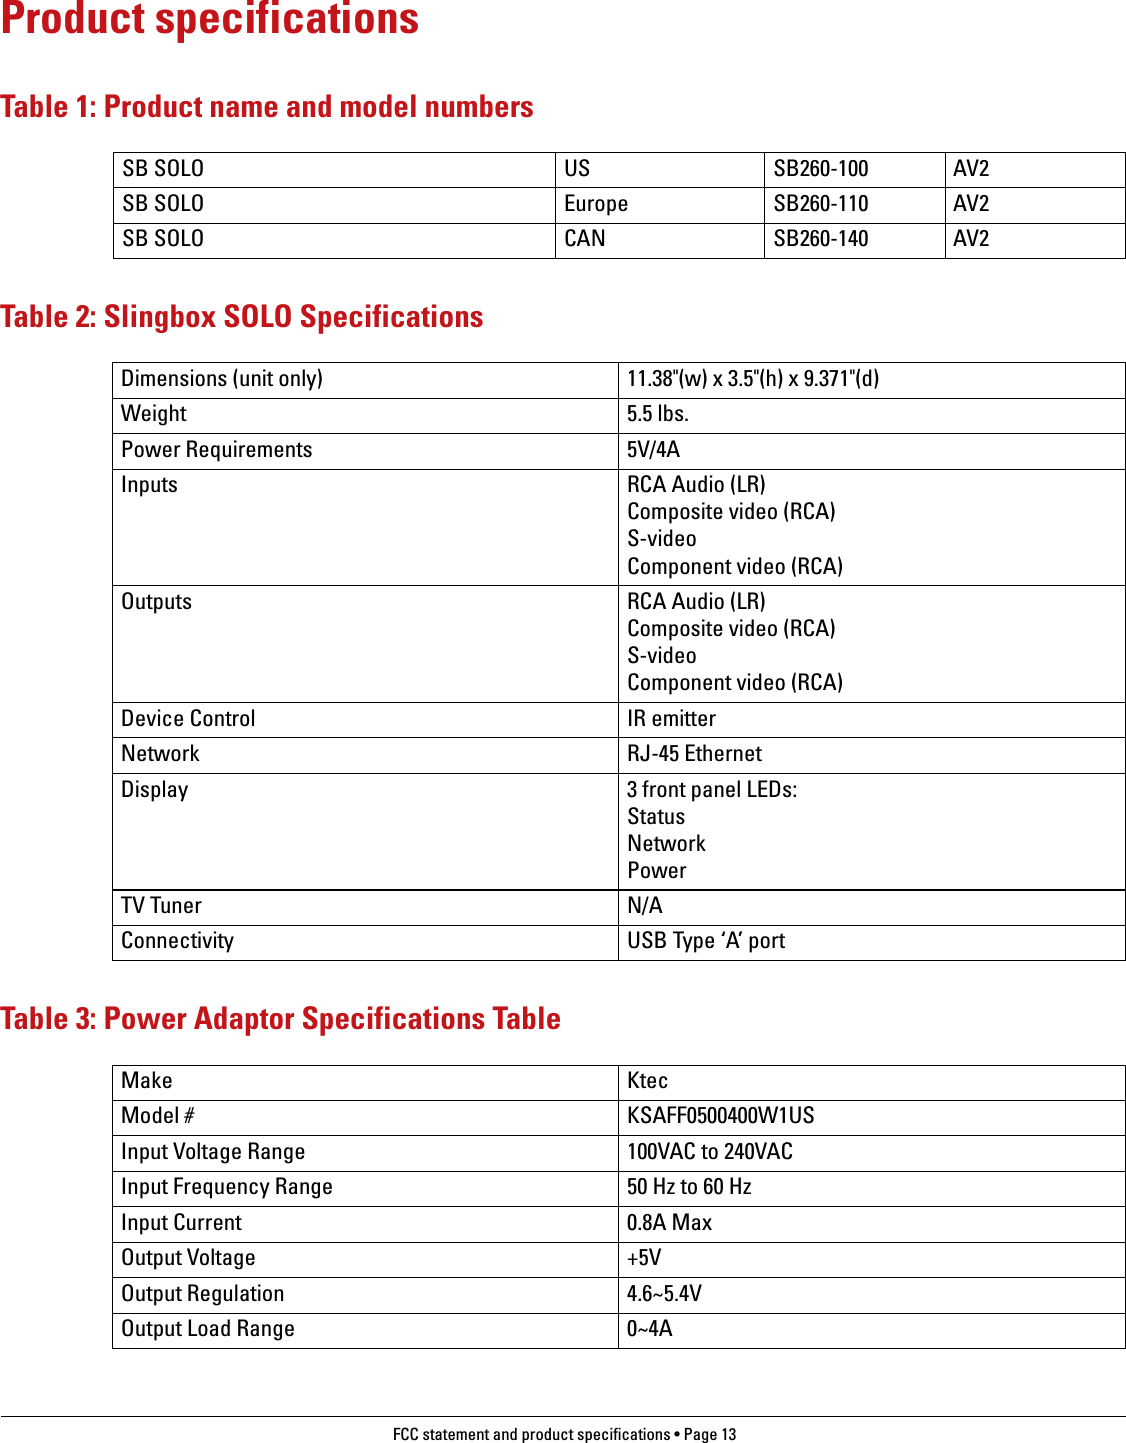 FCC statement and product specifications • Page 13 Product specifications Table 1: Product name and model numbersTable 2: Slingbox SOLO Specifications Table 3: Power Adaptor Specifications TableSB SOLO US SB260-100 AV2SB SOLO Europe SB260-110 AV2SB SOLO CAN SB260-140 AV2Dimensions (unit only) 11.38&quot;(w) x 3.5&quot;(h) x 9.371&quot;(d)Weight 5.5 lbs.Power Requirements 5V/4AInputs RCA Audio (LR) Composite video (RCA) S-video Component video (RCA)Outputs RCA Audio (LR) Composite video (RCA) S-video Component video (RCA)Device Control IR emitterNetwork RJ-45 EthernetDisplay  3 front panel LEDs: Status Network PowerTV Tuner N/AConnectivity USB Type ‘A’ portMake KtecModel # KSAFF0500400W1USInput Voltage Range 100VAC to 240VACInput Frequency Range 50 Hz to 60 HzInput Current 0.8A MaxOutput Voltage +5VOutput Regulation 4.6~5.4VOutput Load Range 0~4A